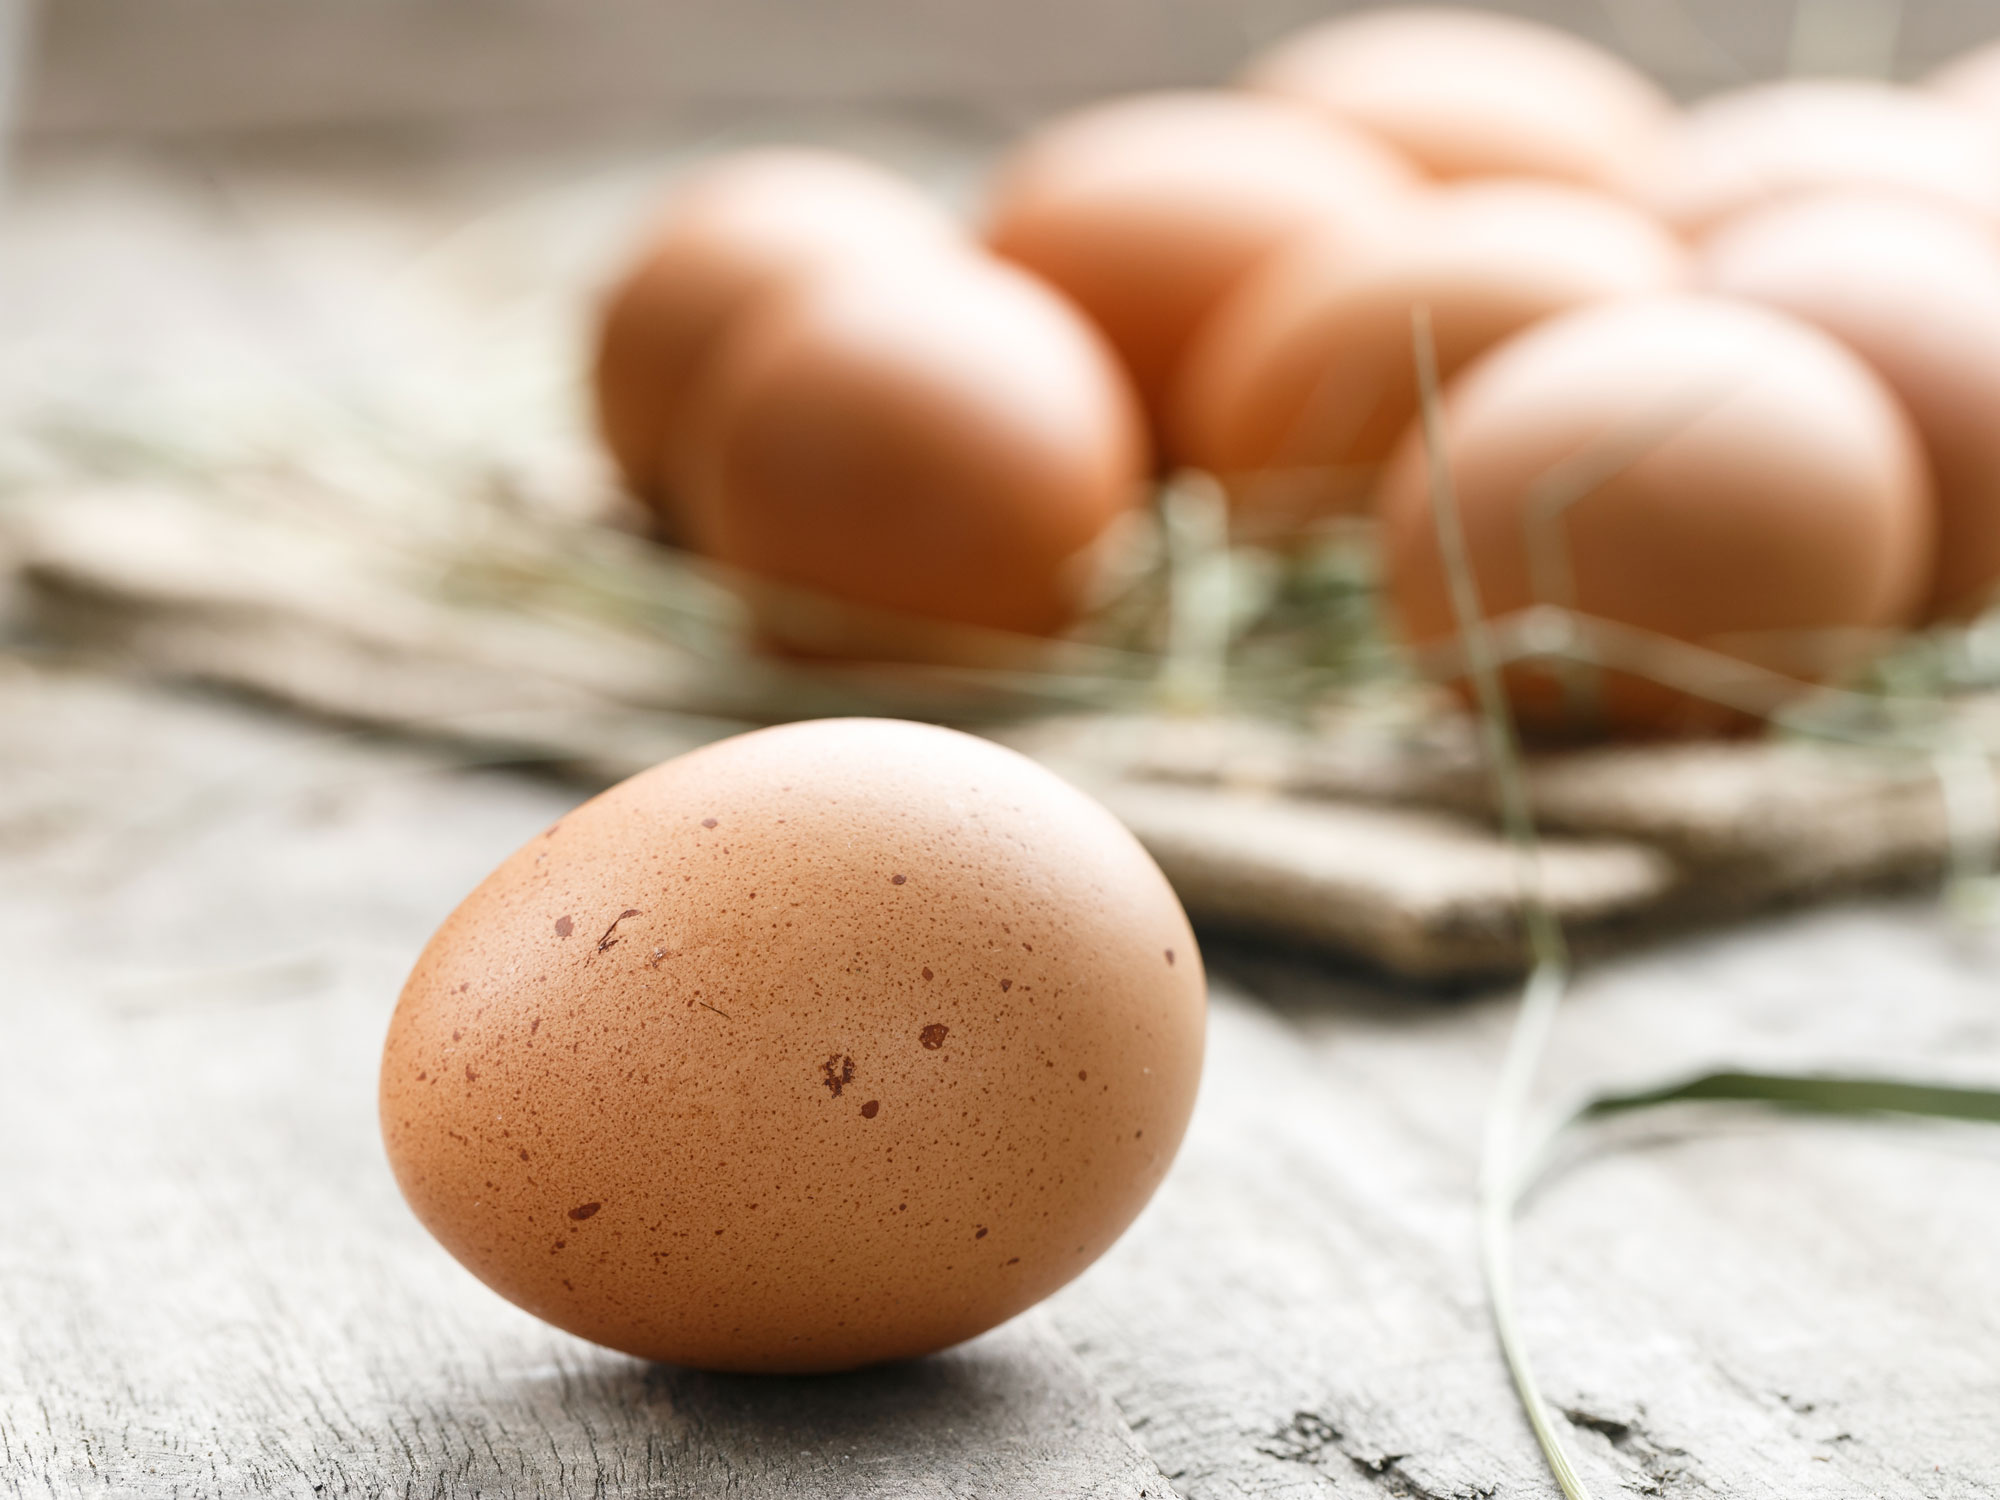 What’s new? Cancer-fighting eggs produced from hens with human genes